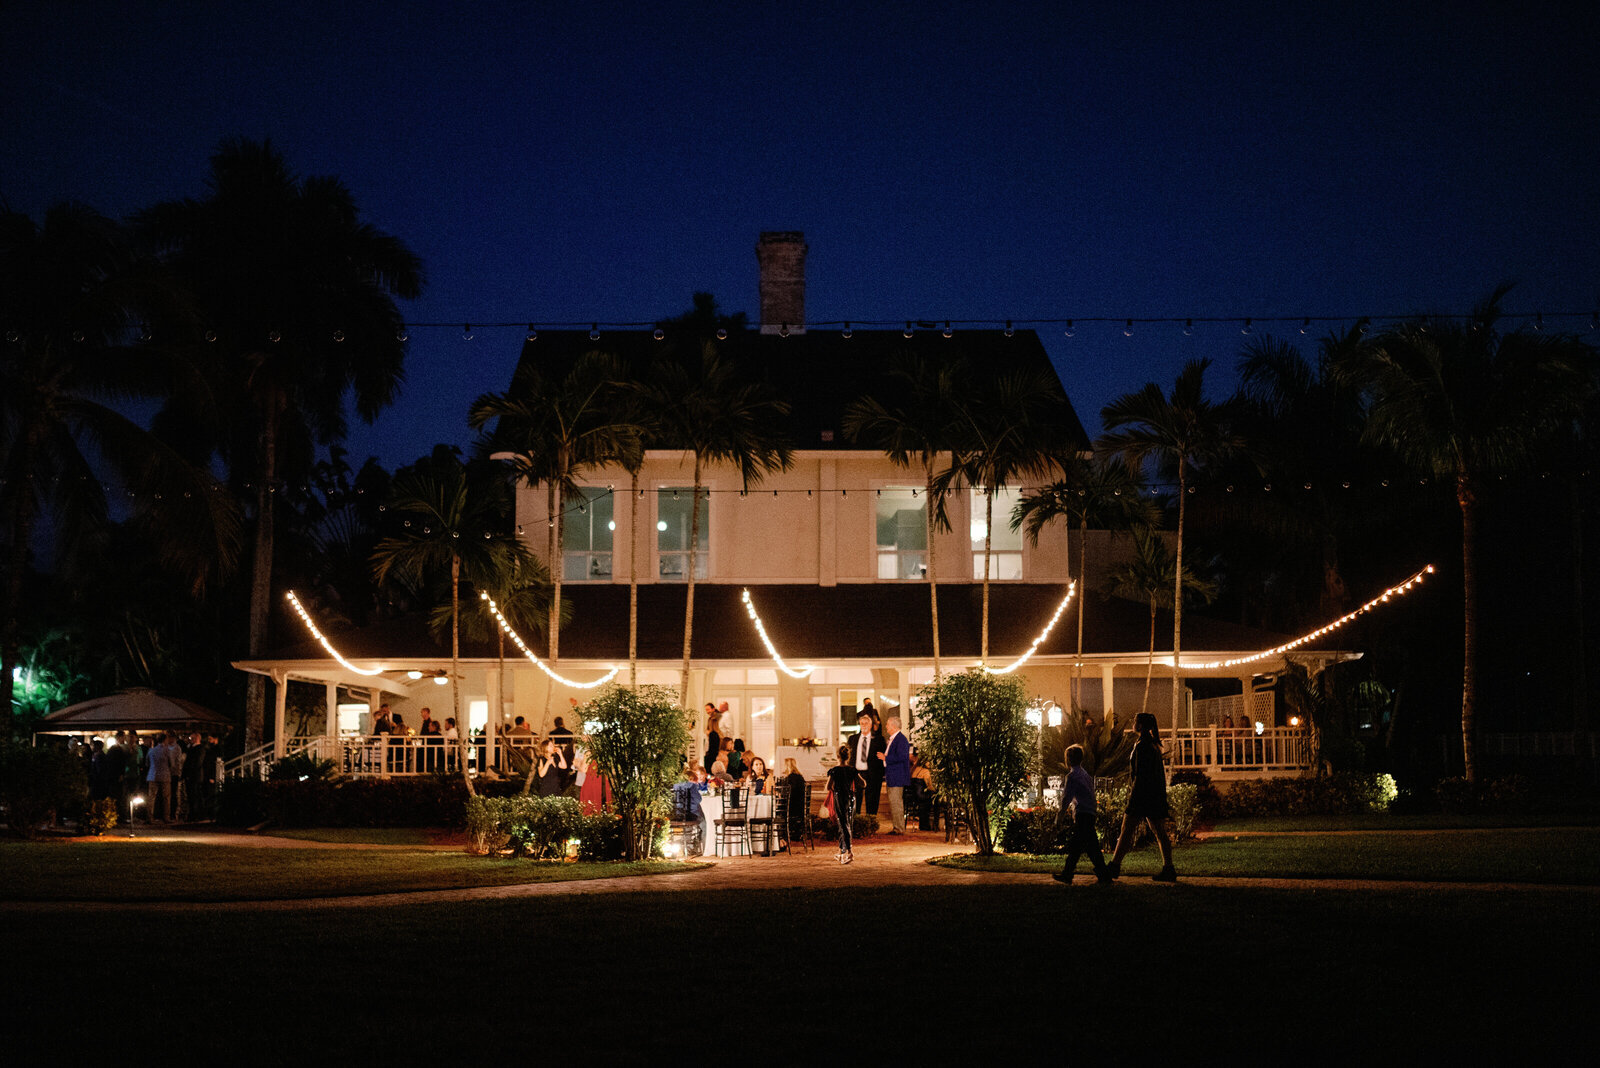 wide view of White Orchid at Oasis at night during wedding reception. String lights are lit